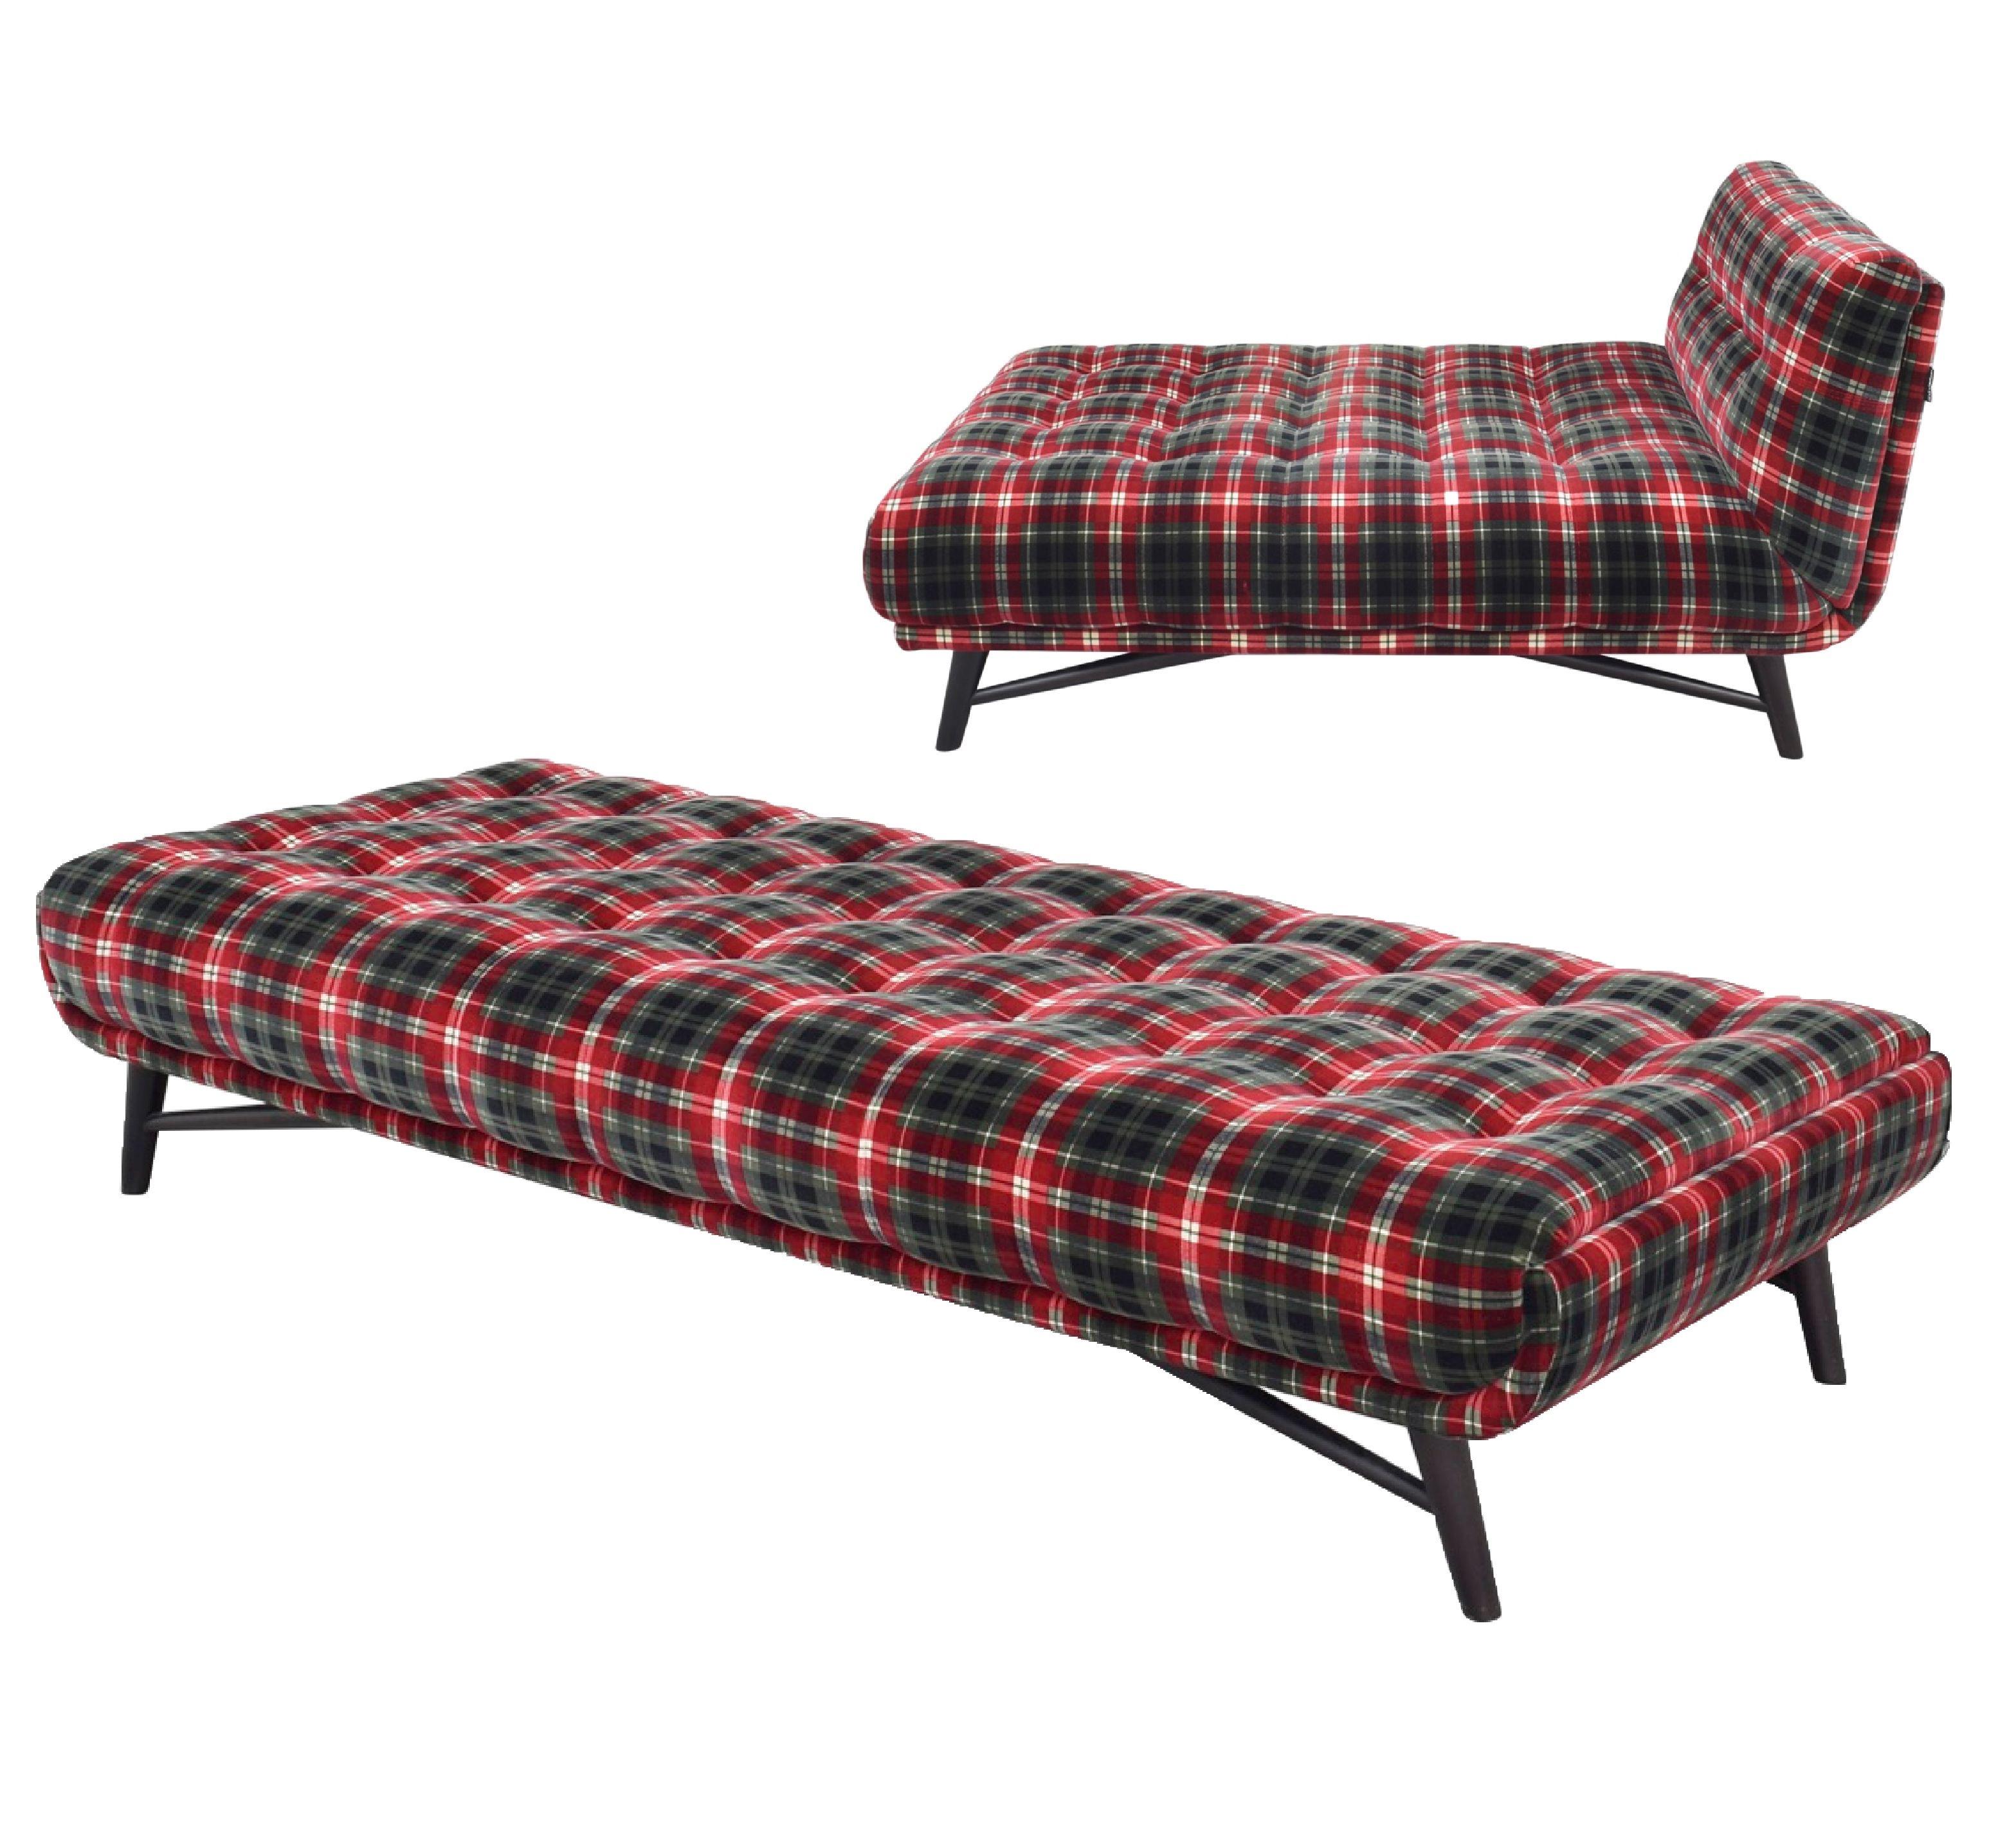 Jean Paul Gautier red tartan velvet Roche Bobois profile lounge chair, chaise. Profile is a timeless model designed by Roberto Tapinassi & Maurizio Manzoni. It combines a 1950s inspired shape with a very contemporary base. The velvet upholstery is